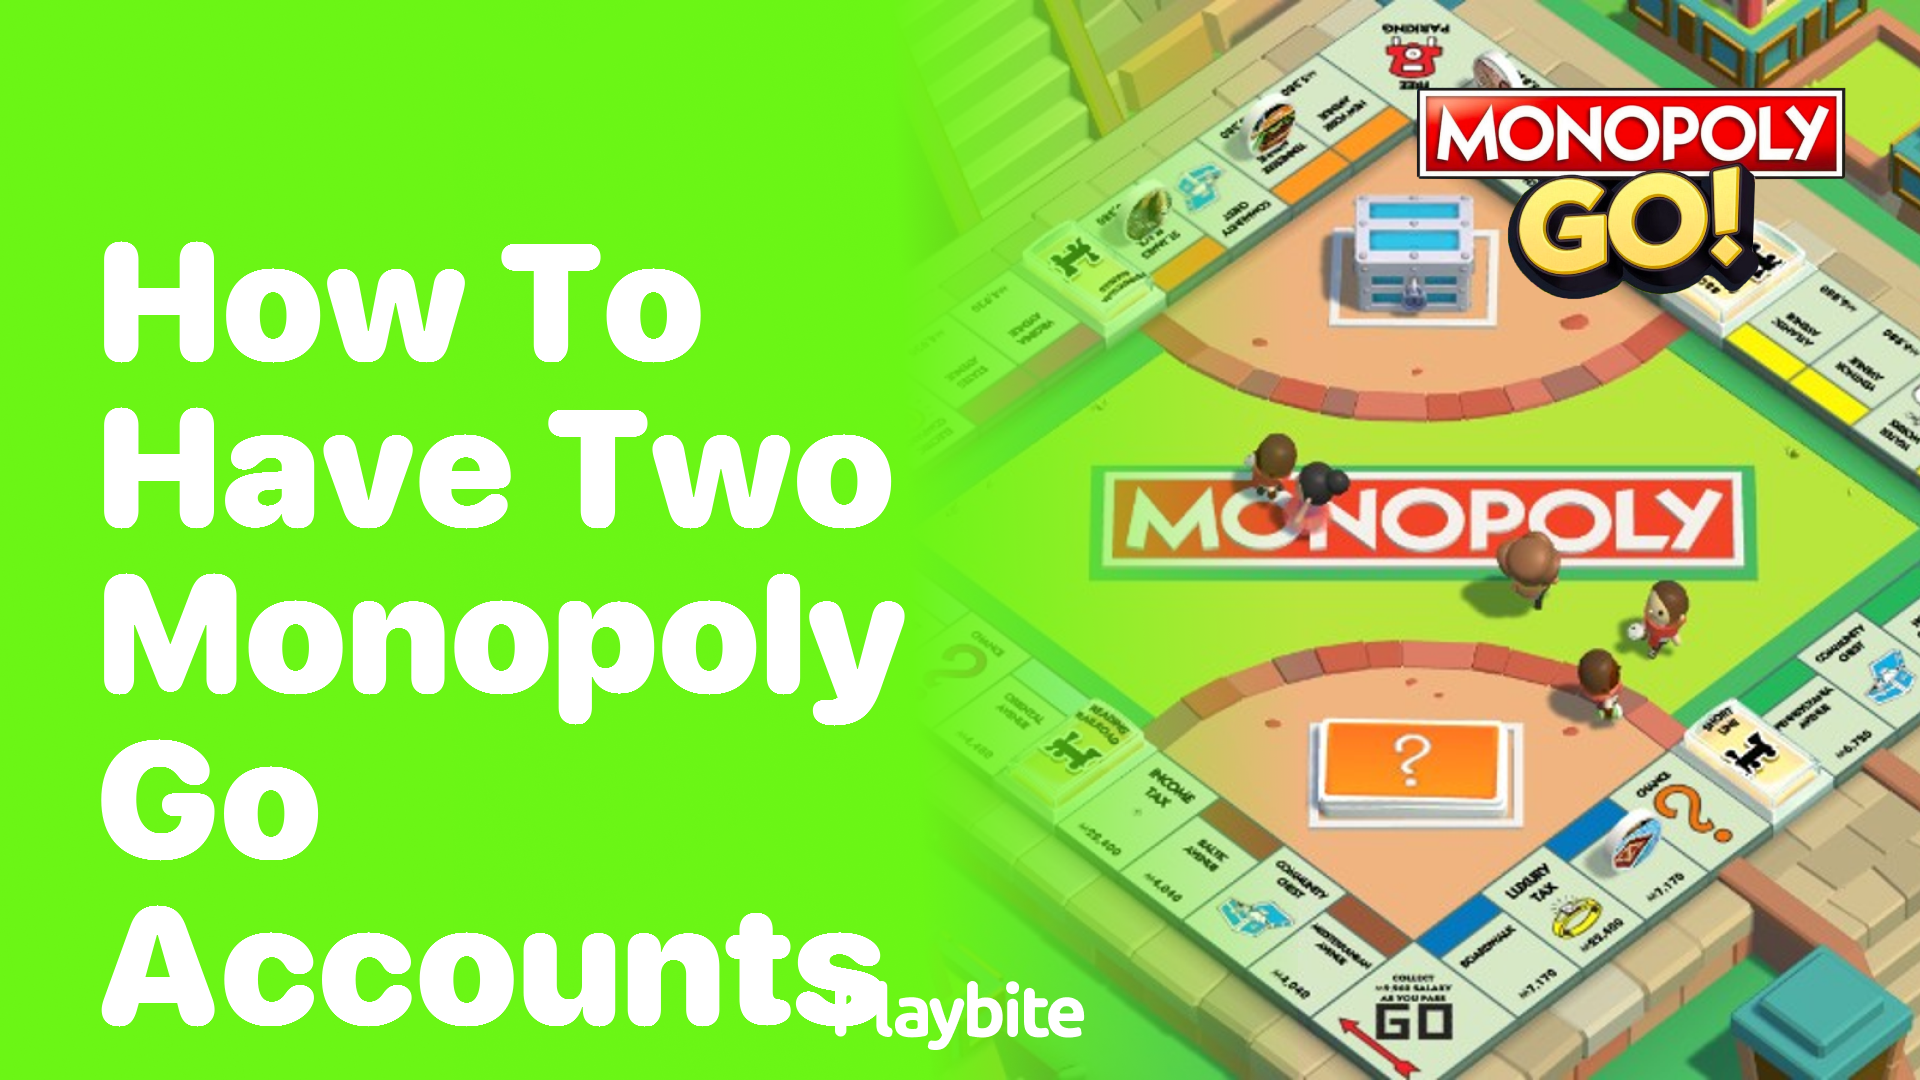 How to Have Two Monopoly Go Accounts